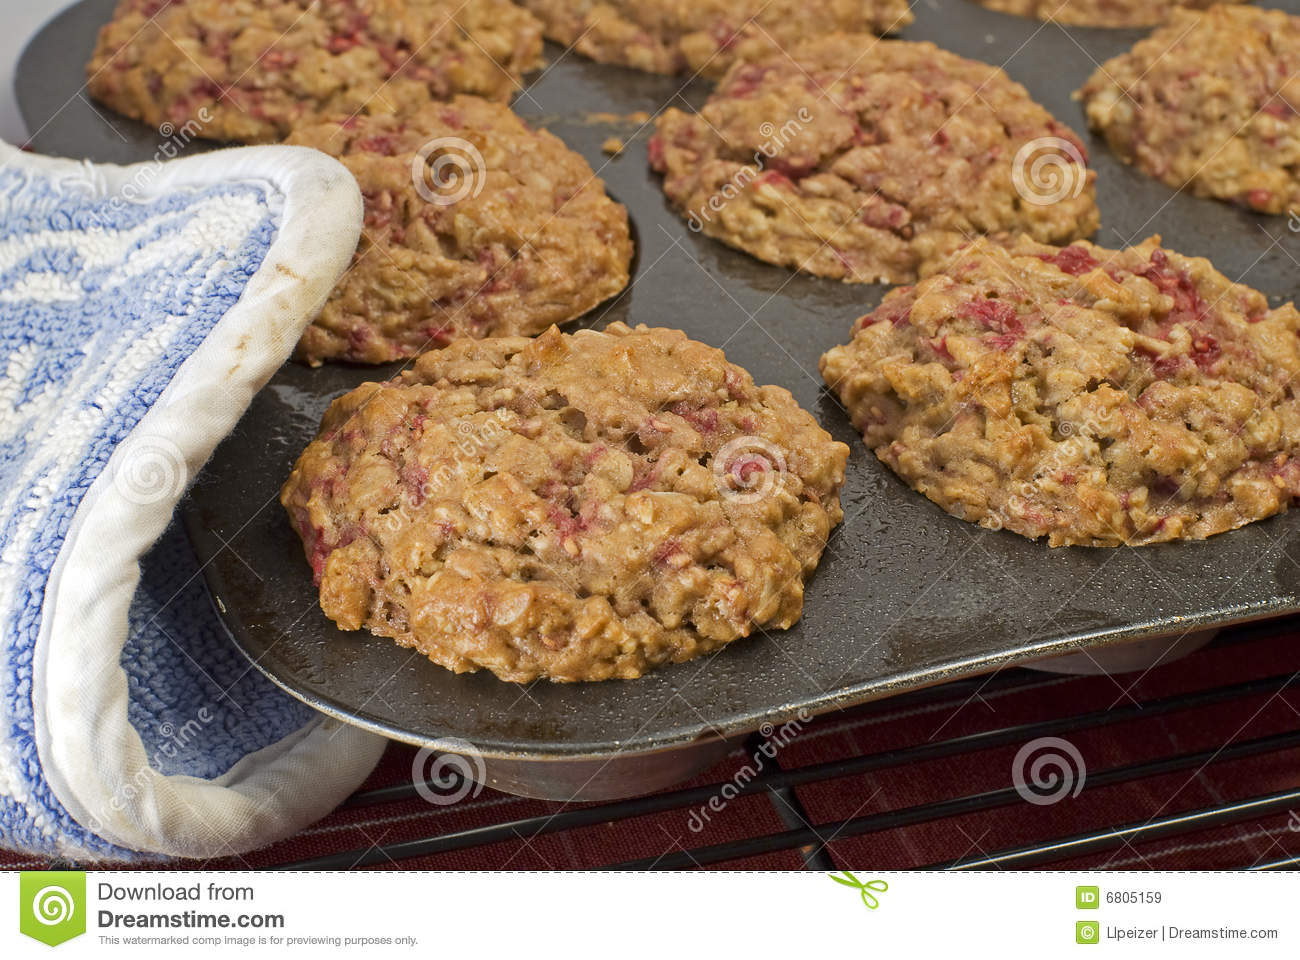 Warm Oat Berry Muffins Royalty Free Stock Images   Image  6805159